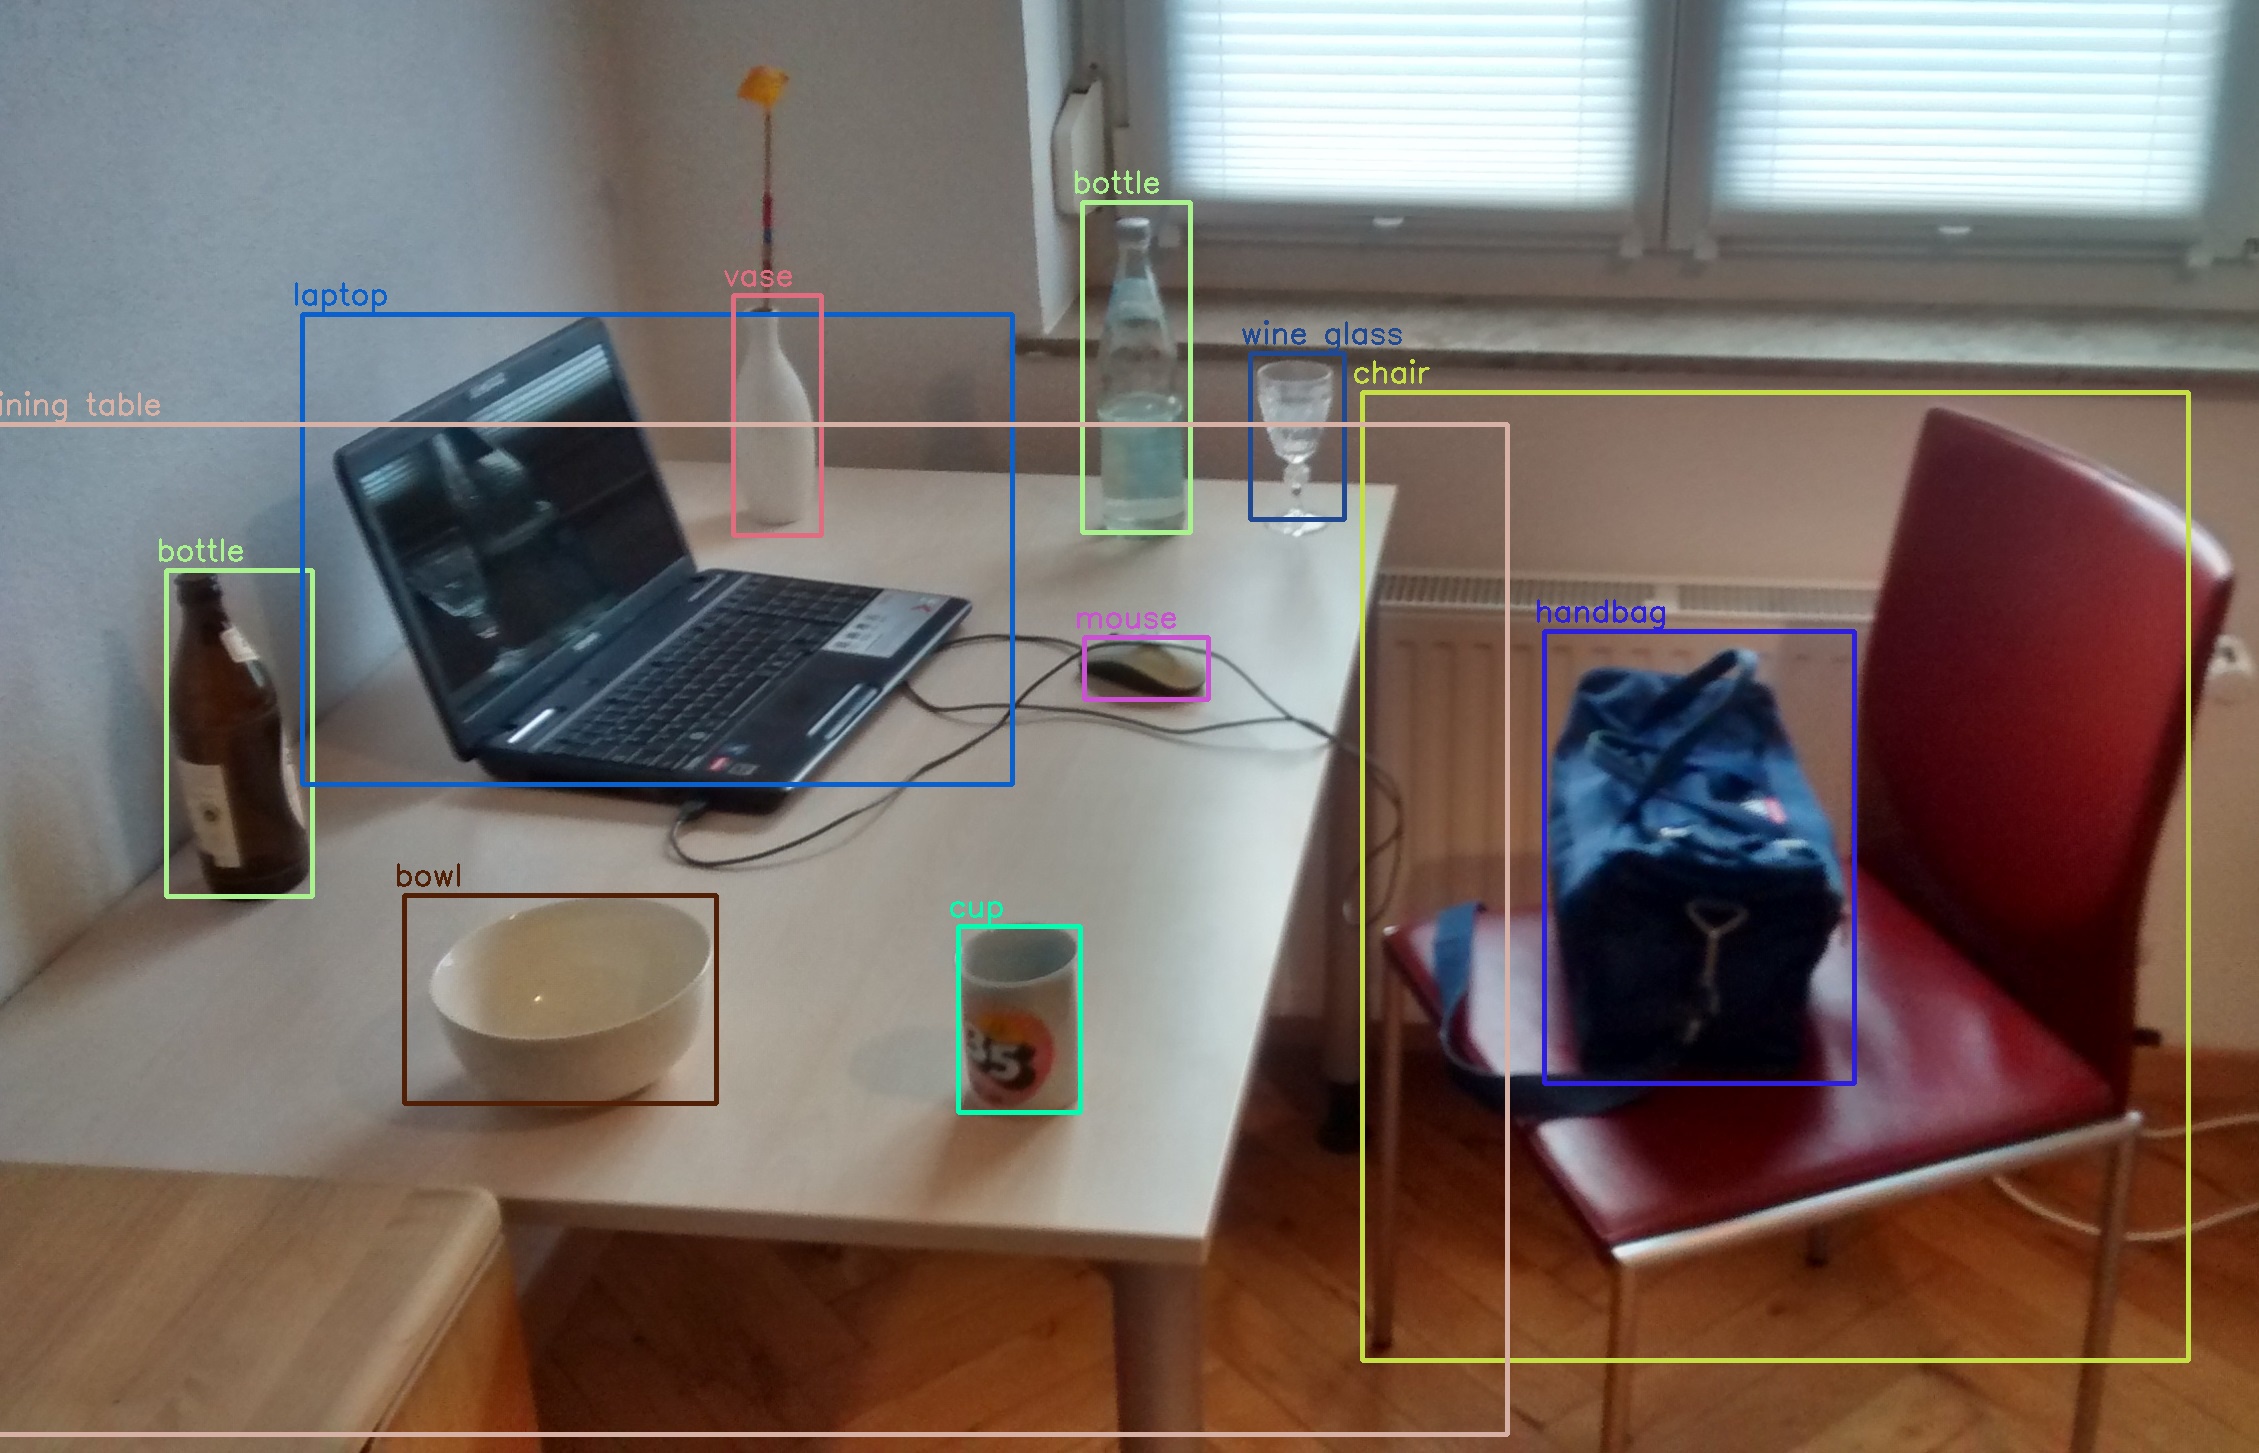 Output from a computer vision model showing objects detected in a room